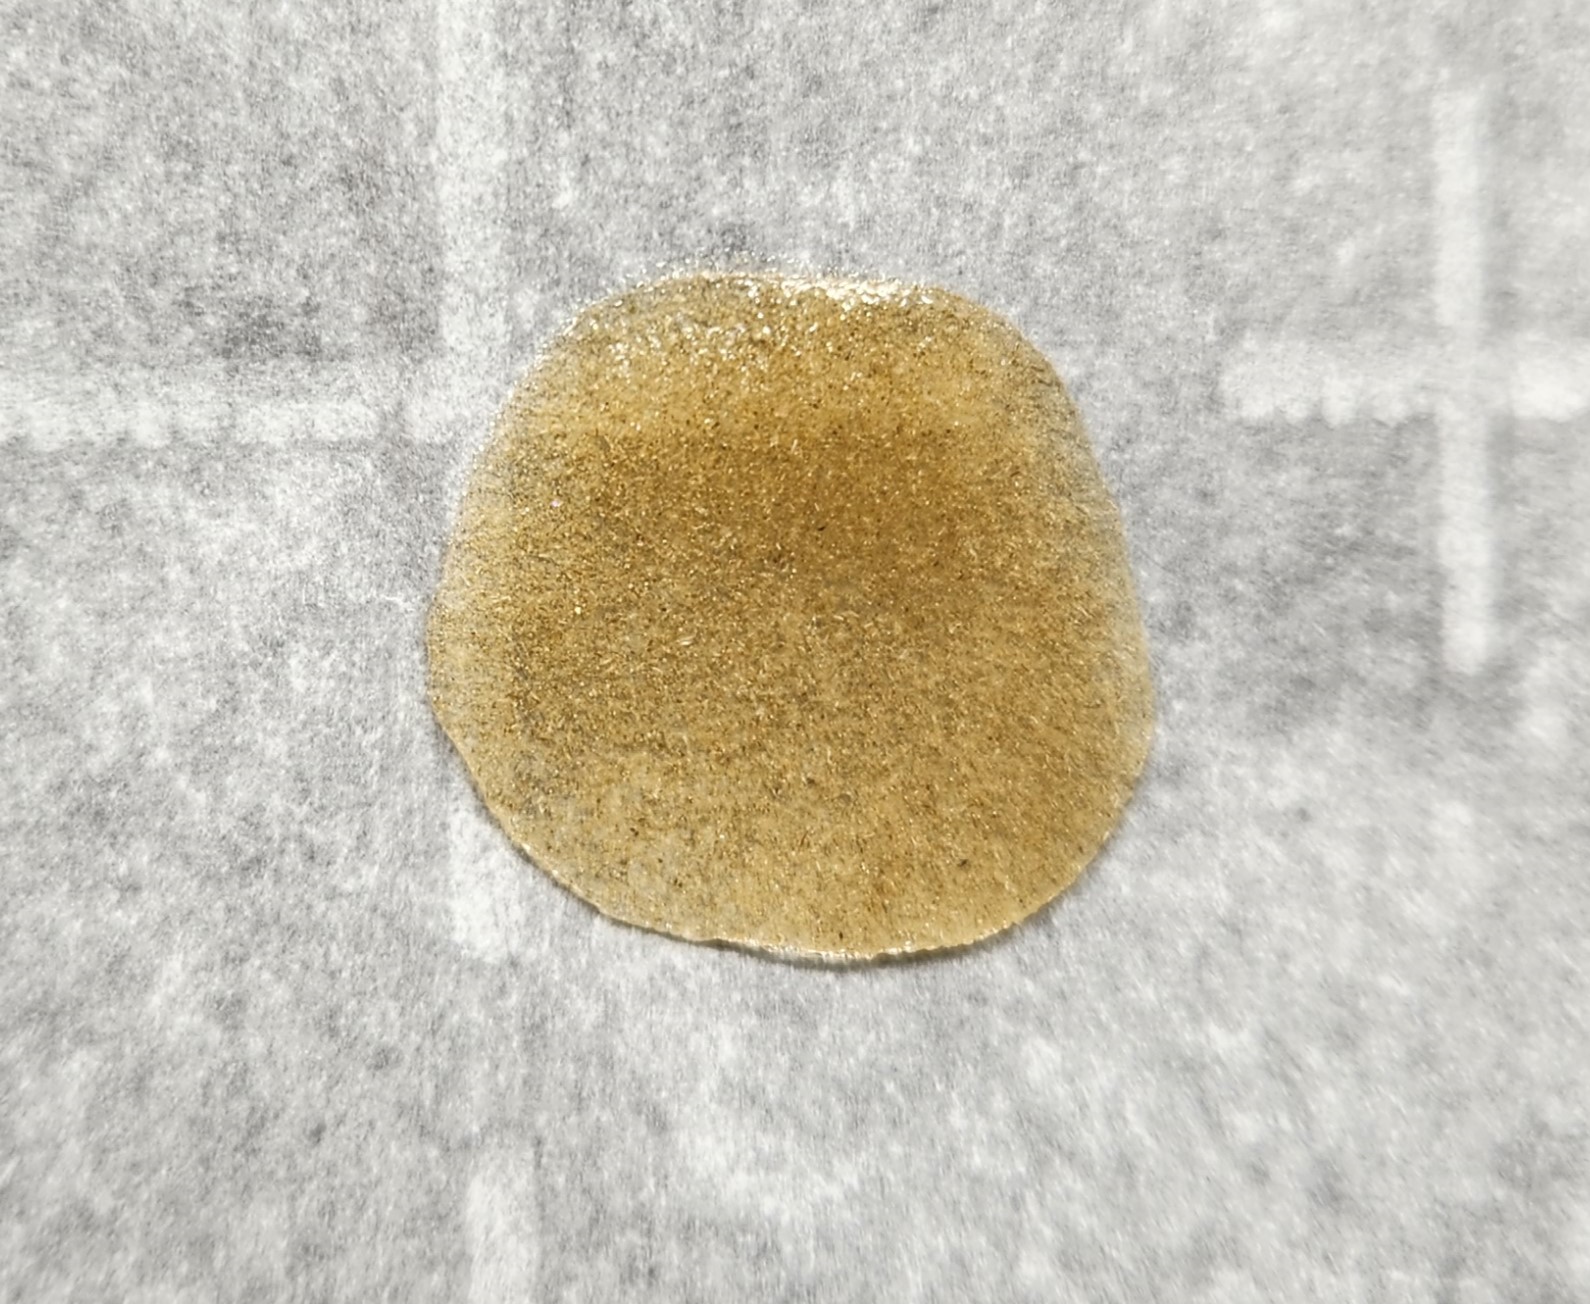 Pressed water hash on parchment